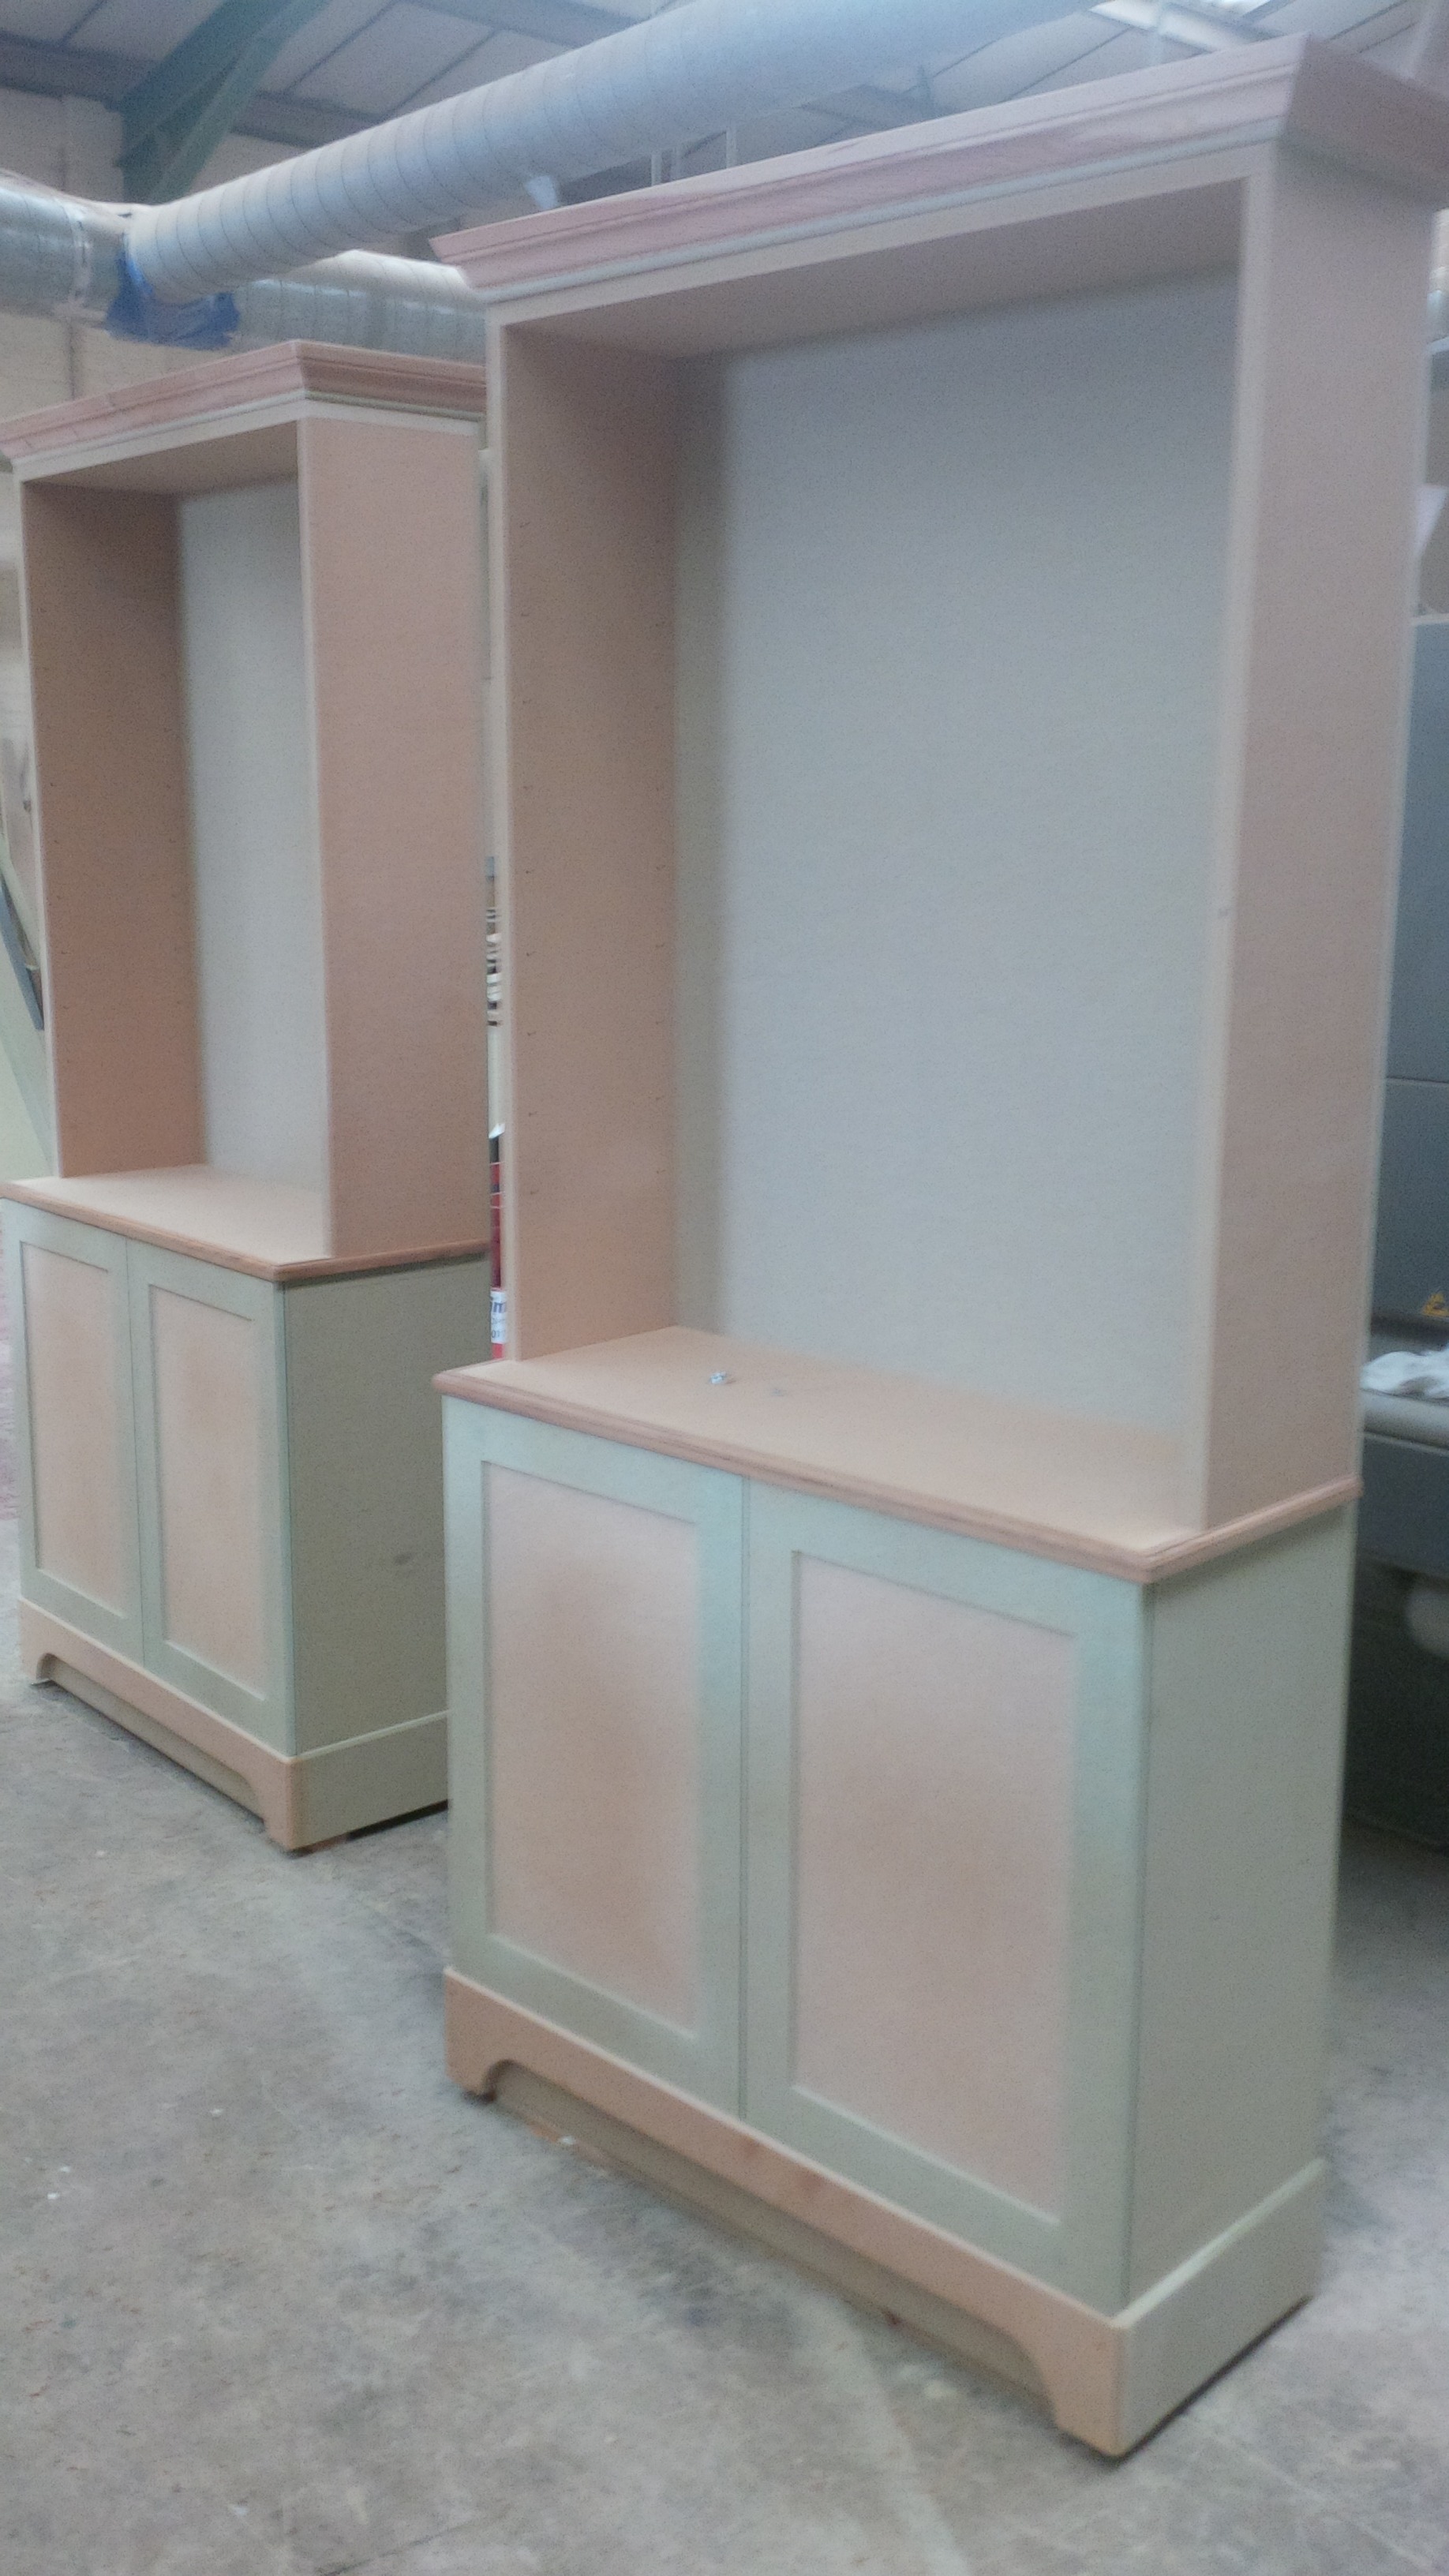 Bespoke book cases before being painted 